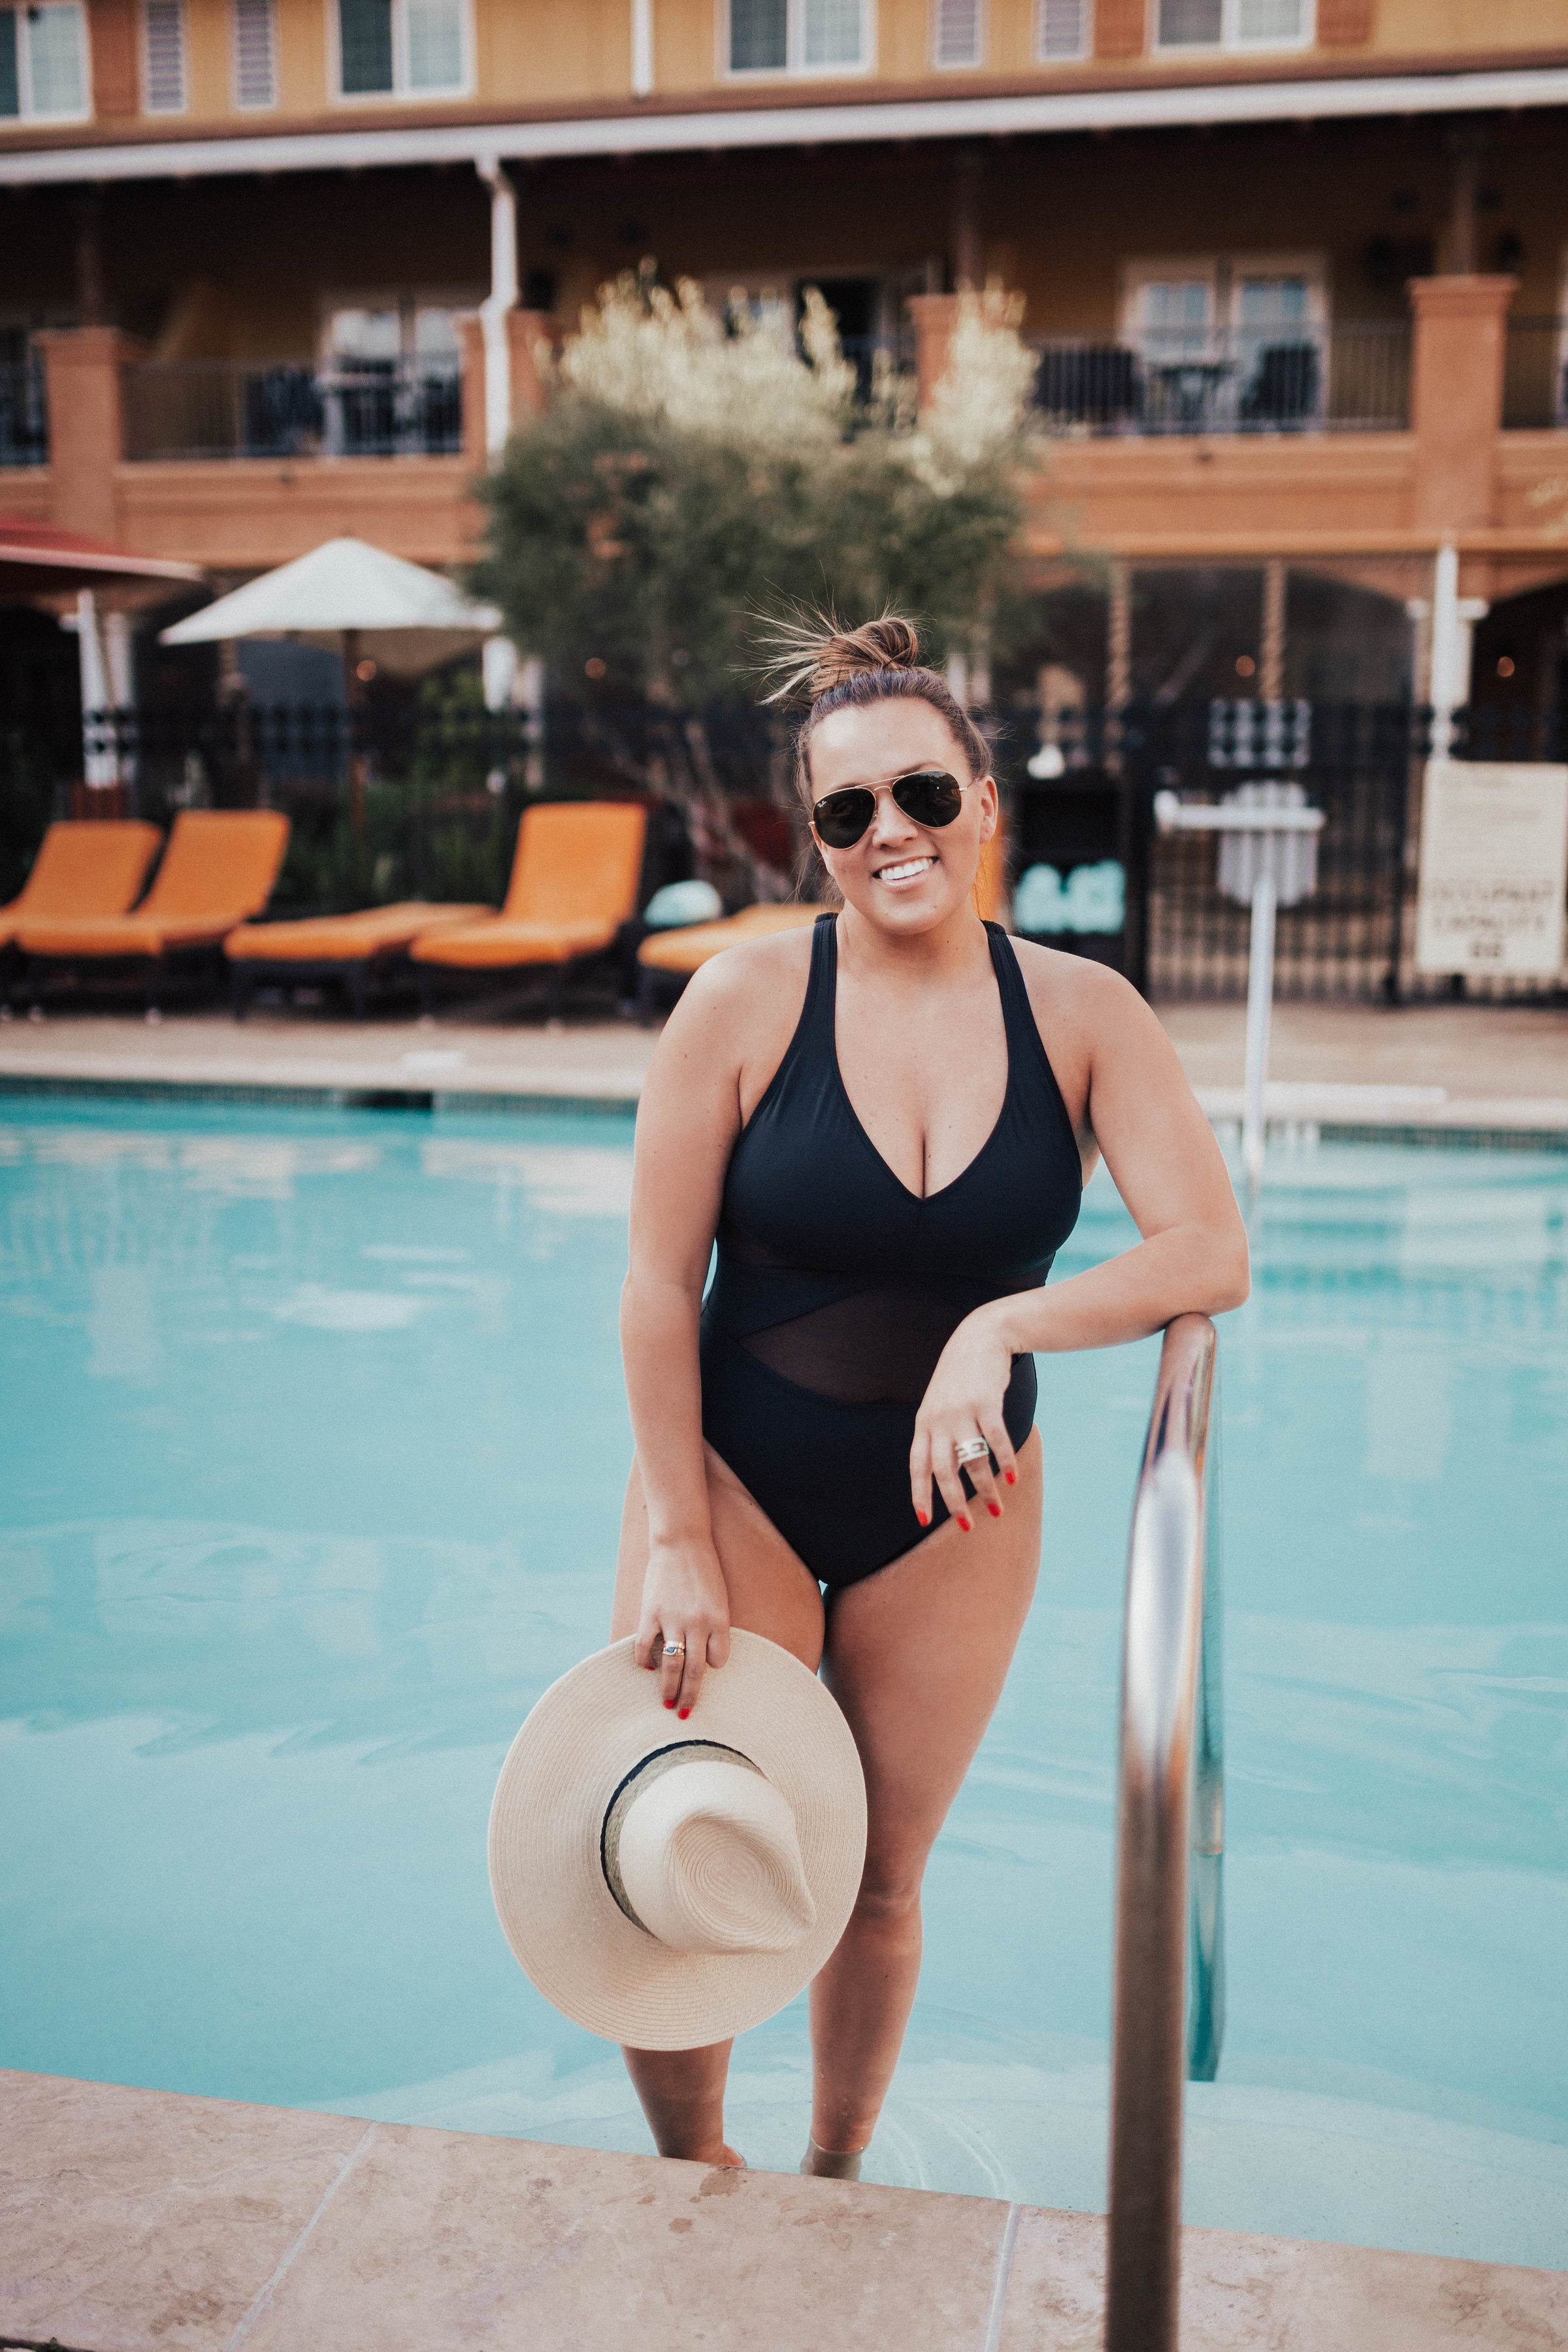 Ashley Zeal from Two Peas in a Prada shares what's in her beach bag, including: sunscreen, lip balm, sunnies and sun hats! She is wearing Bleu by Rod Beattie. 